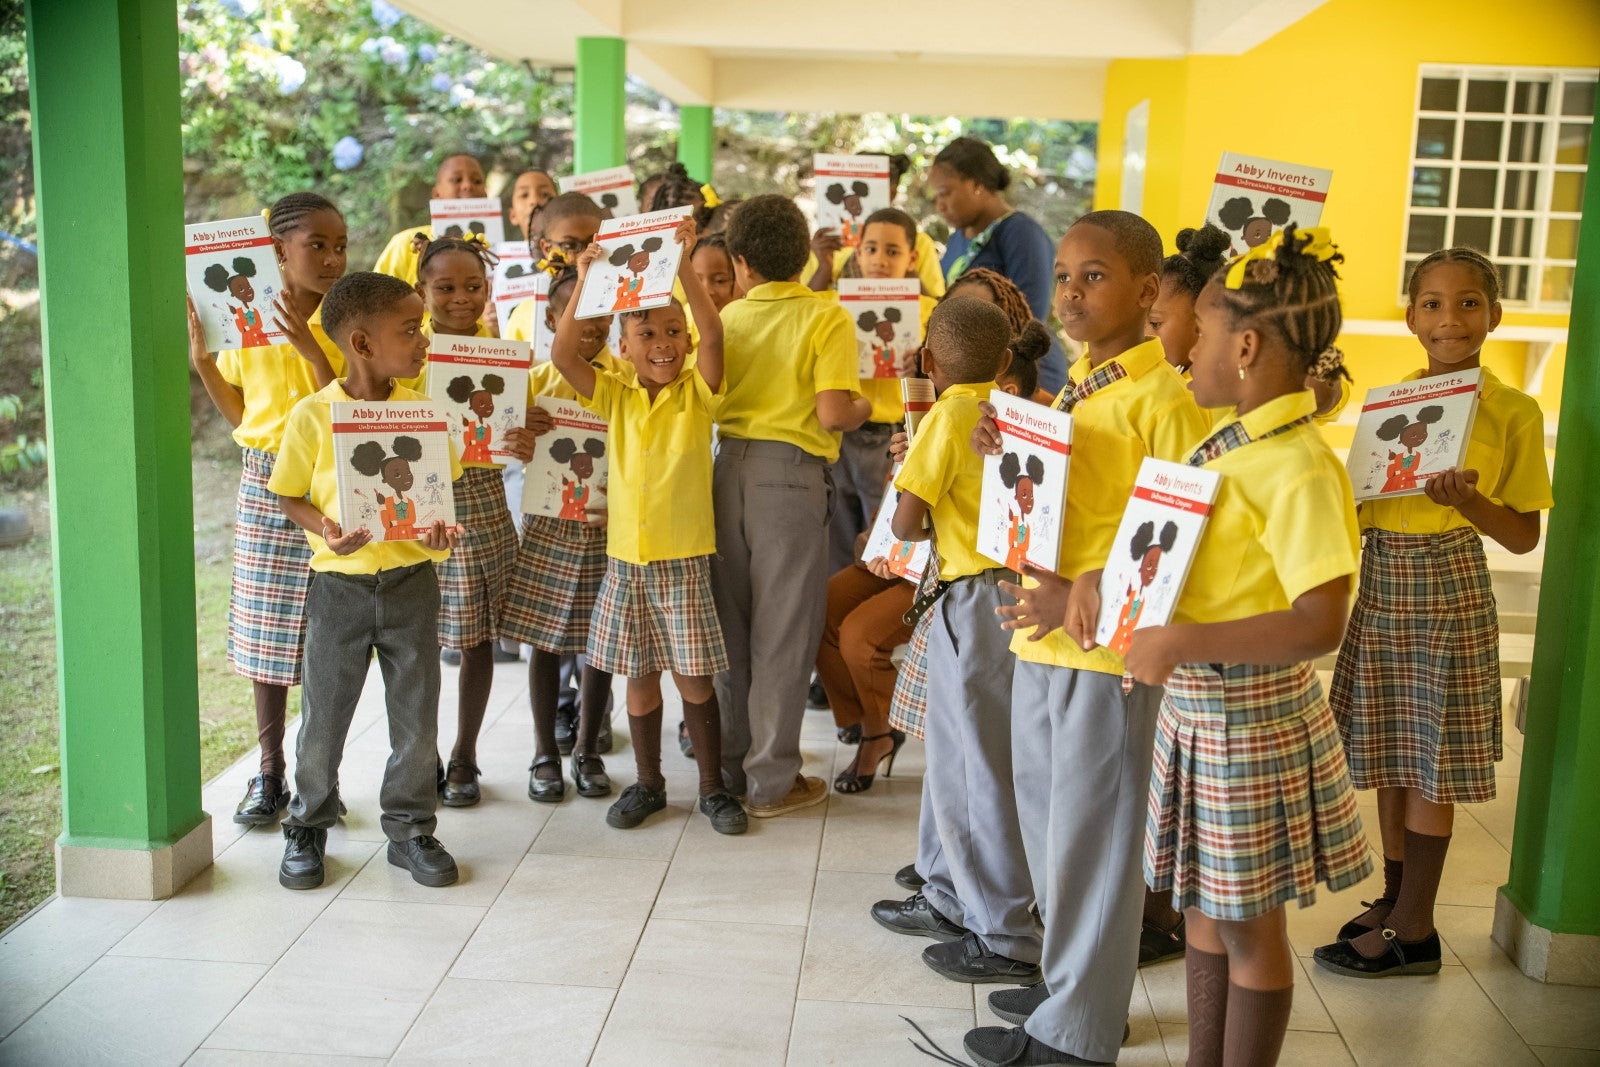 Kids in Dominica with Abby Invents books